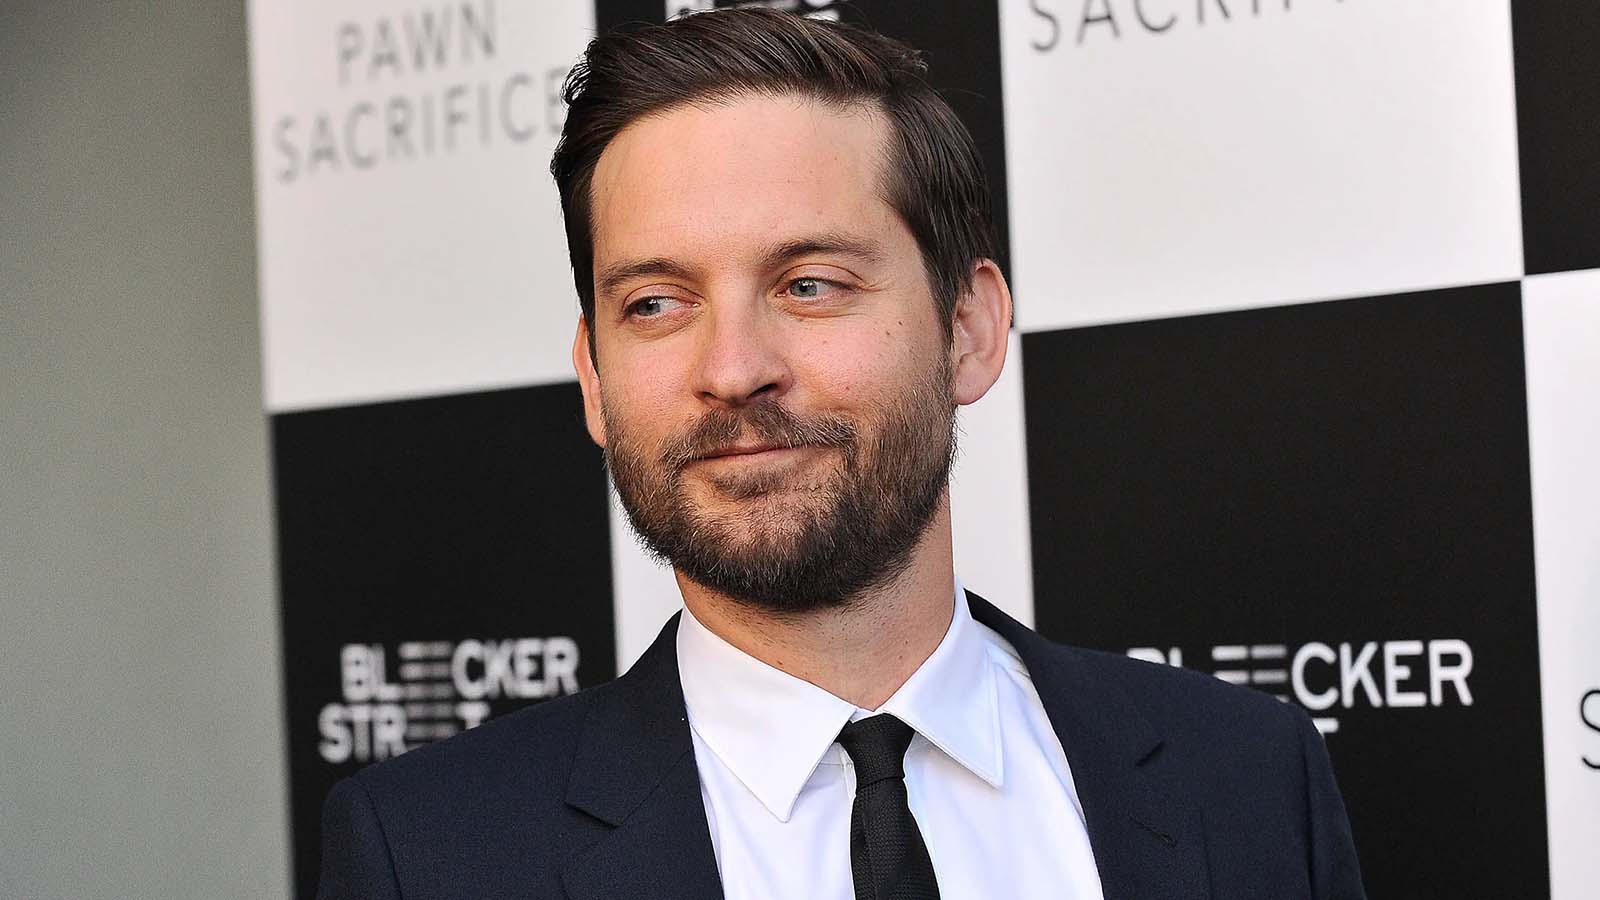 Tobey Maguire With great power comes great responsibilityeven if it's gambling